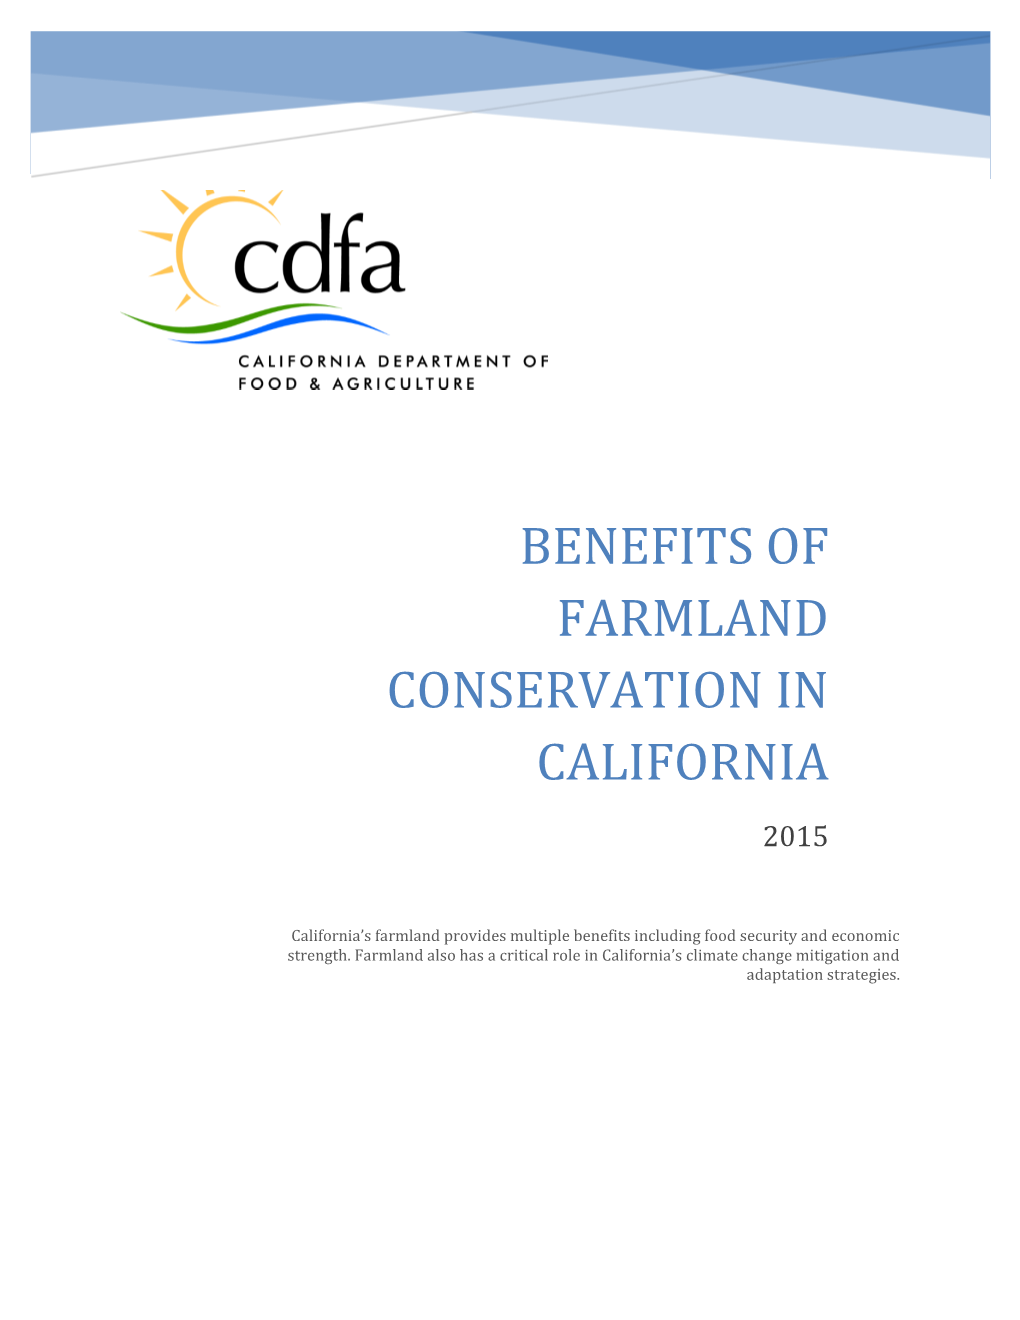 Benefits of Farmland Conservation in California